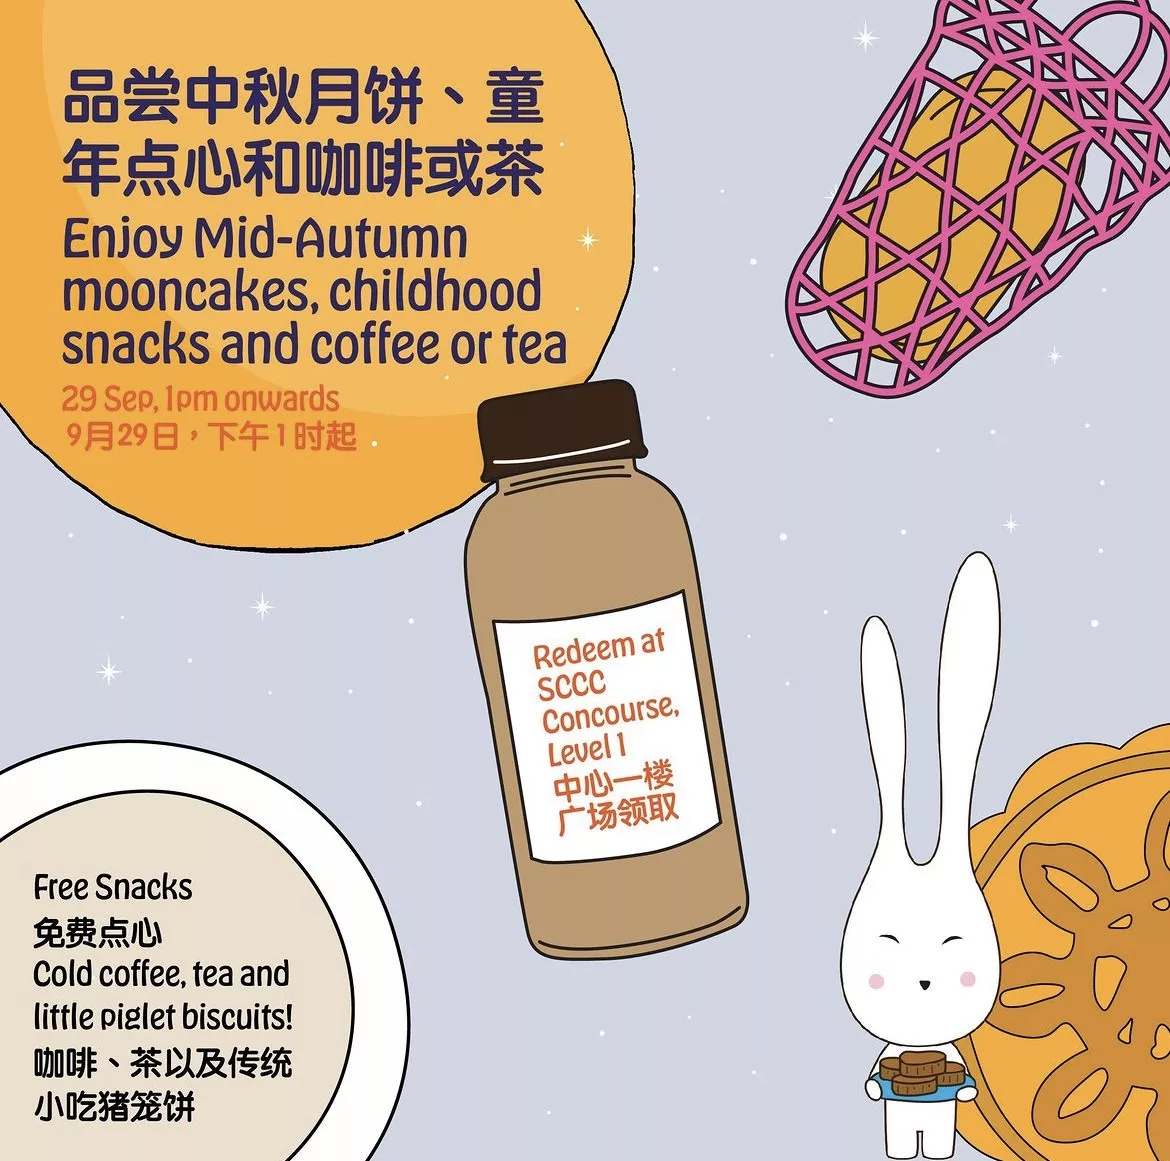 Free Cold Brew Coffee and Tea, Childhood Snacks, Mooncakes and Piglet Biscuits